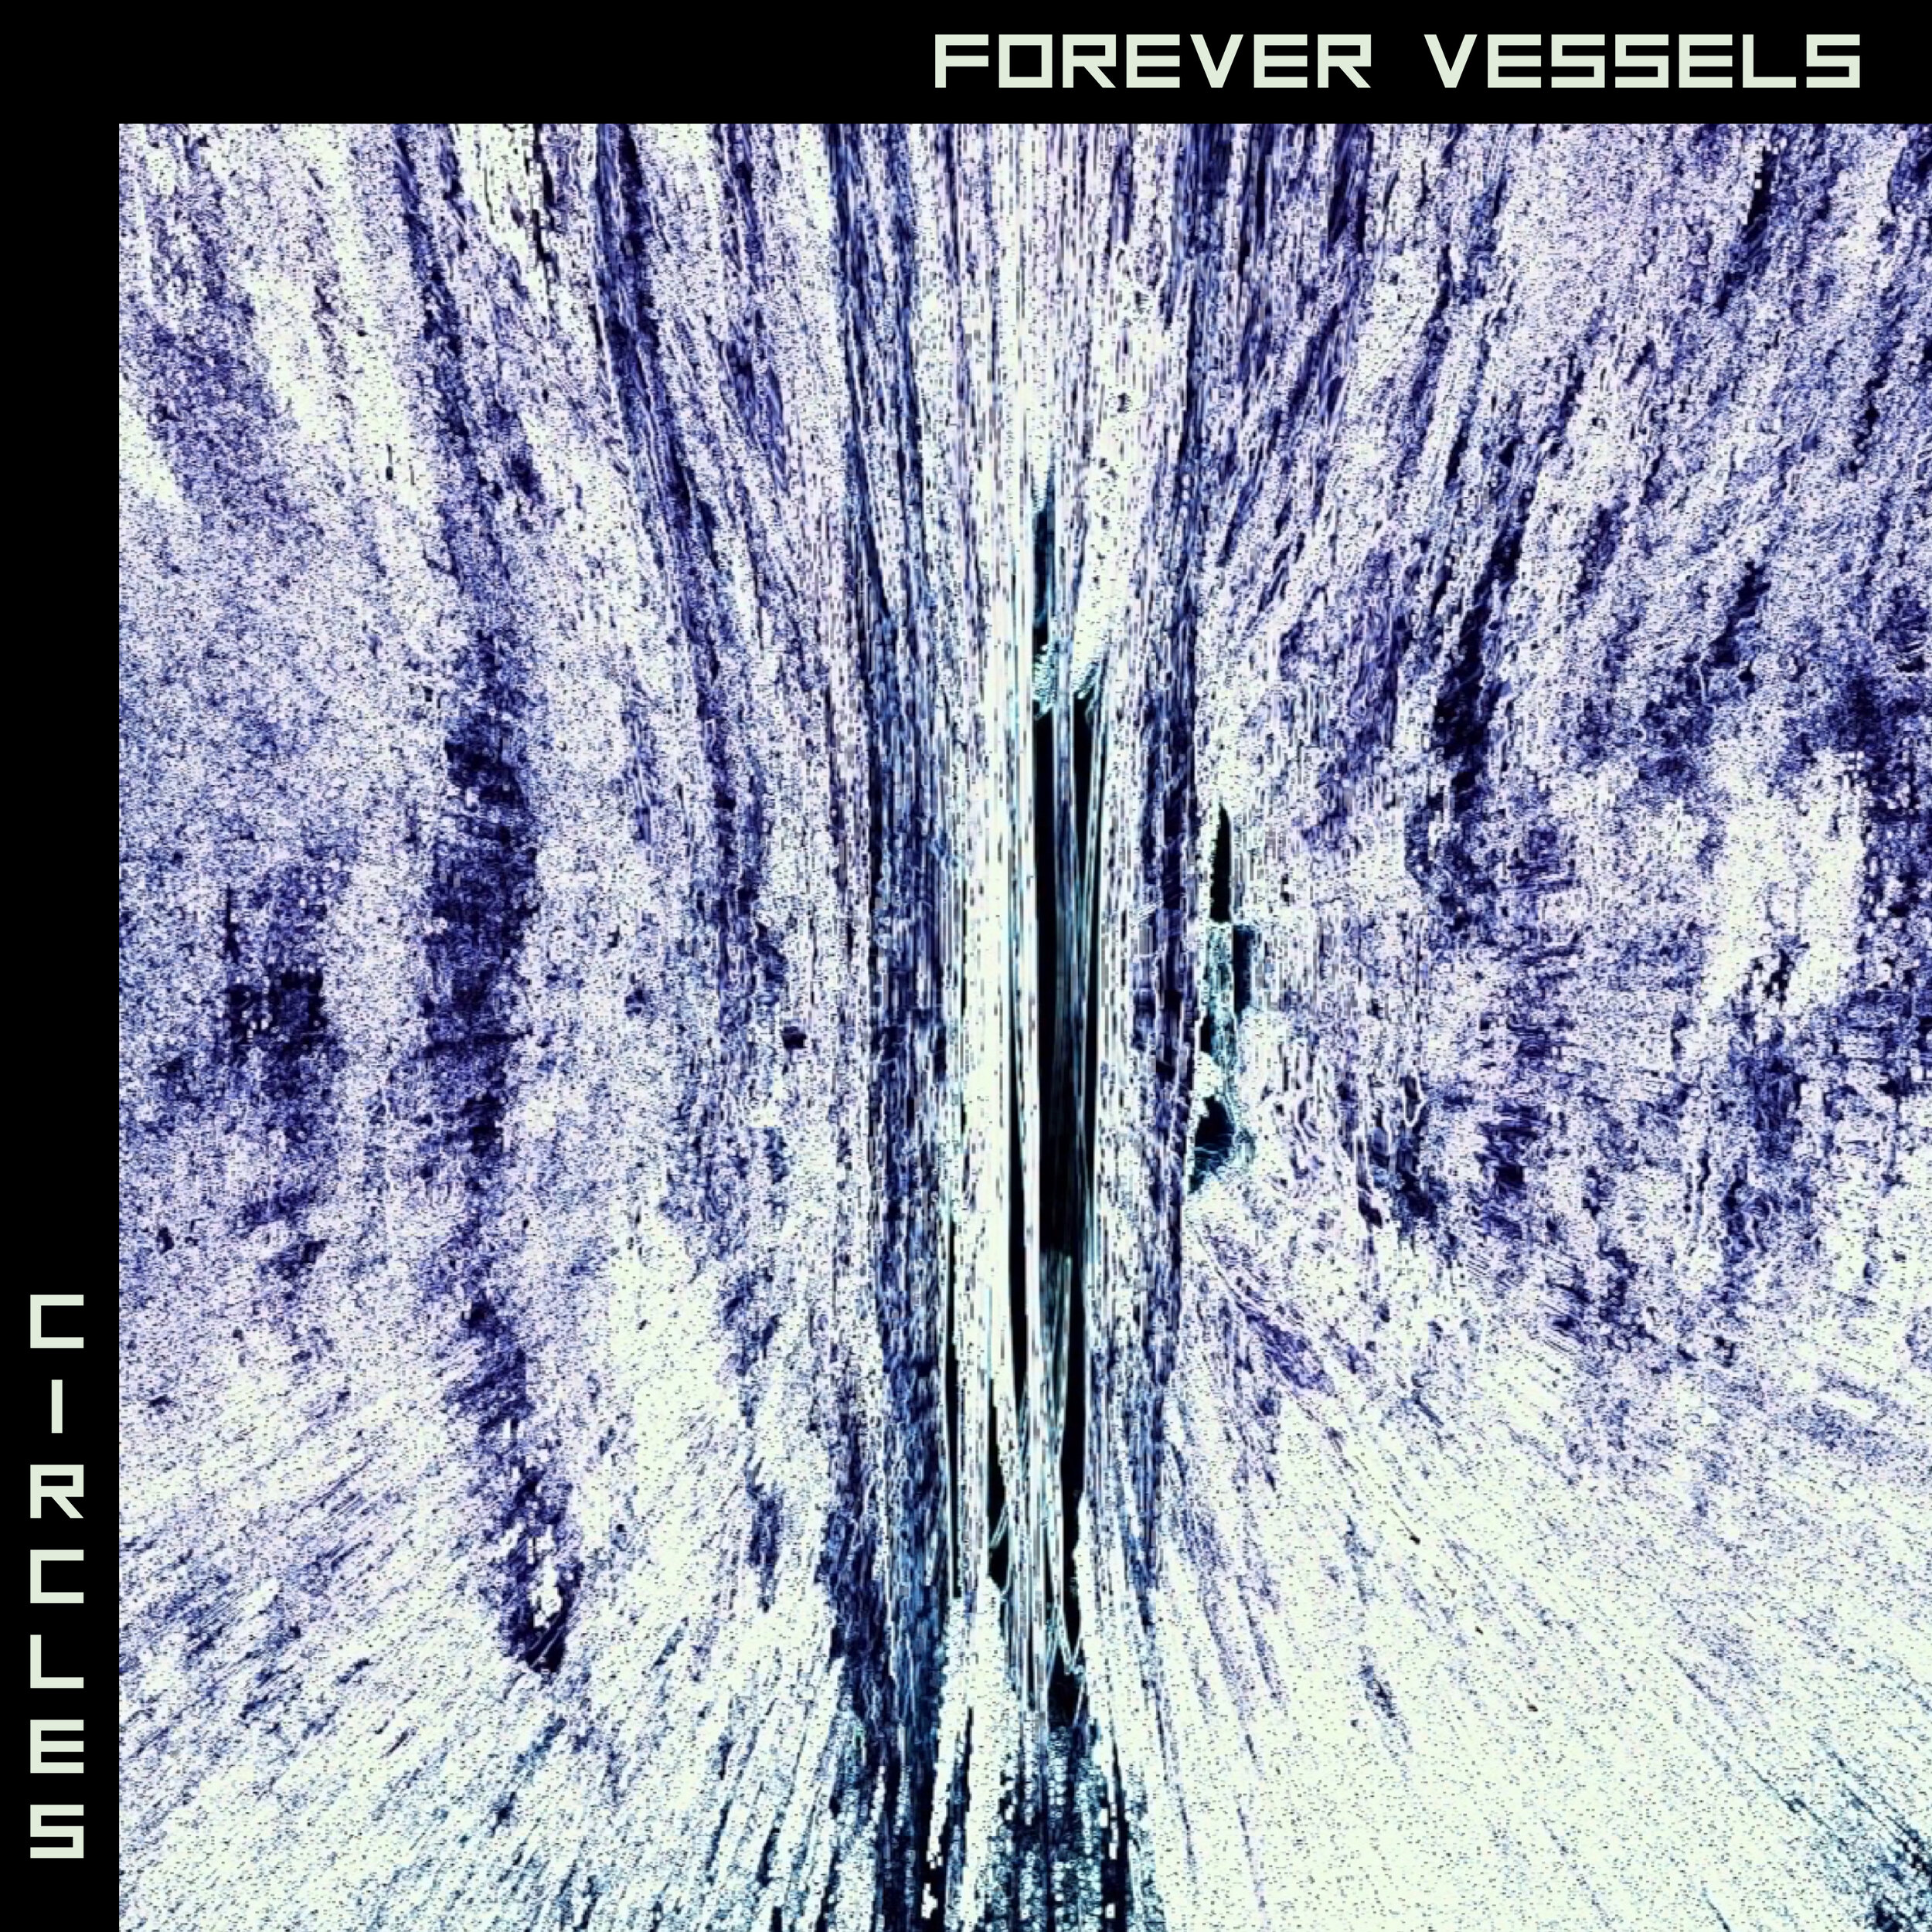 Forever Vessels - Circles Cover.jpg